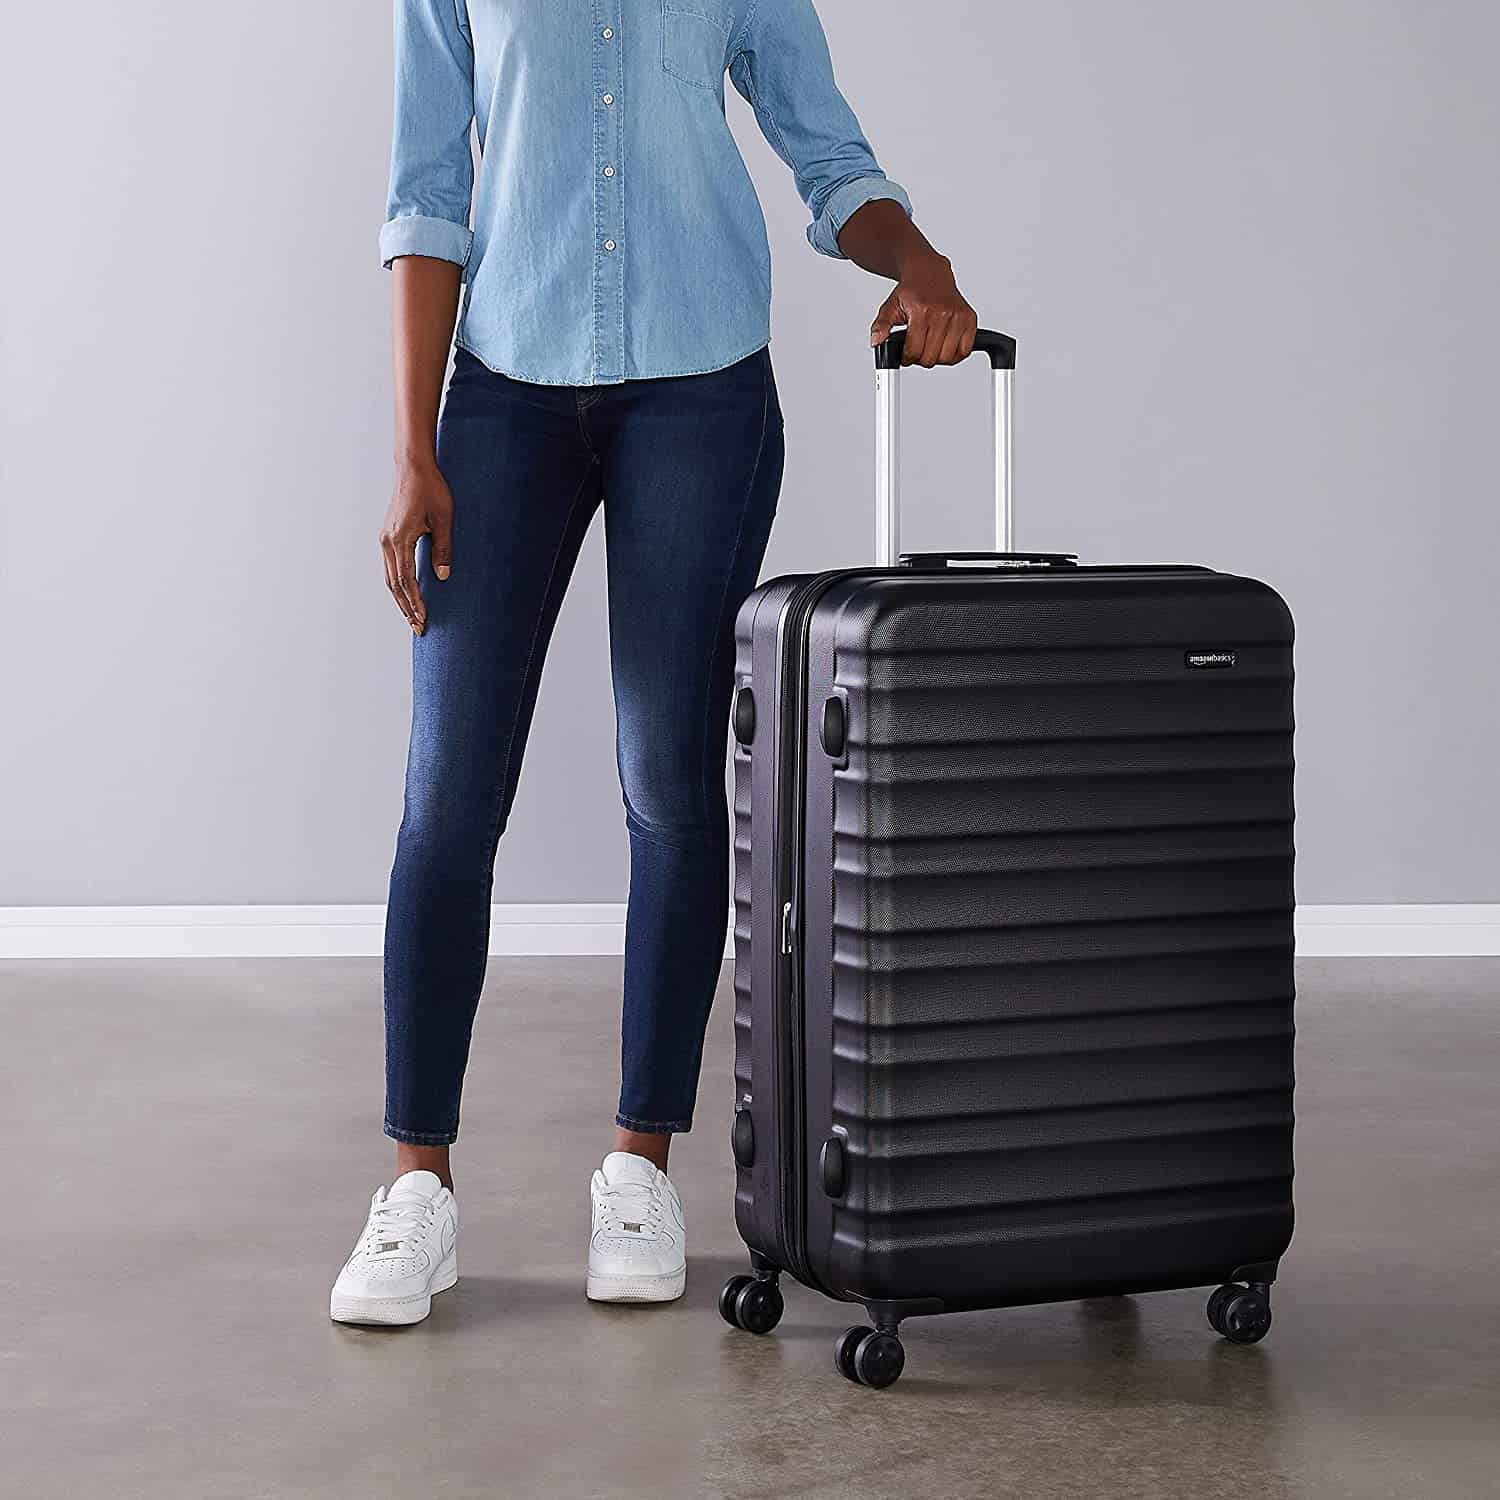 Best Suitcase for Teens and Students- Amazon Basics